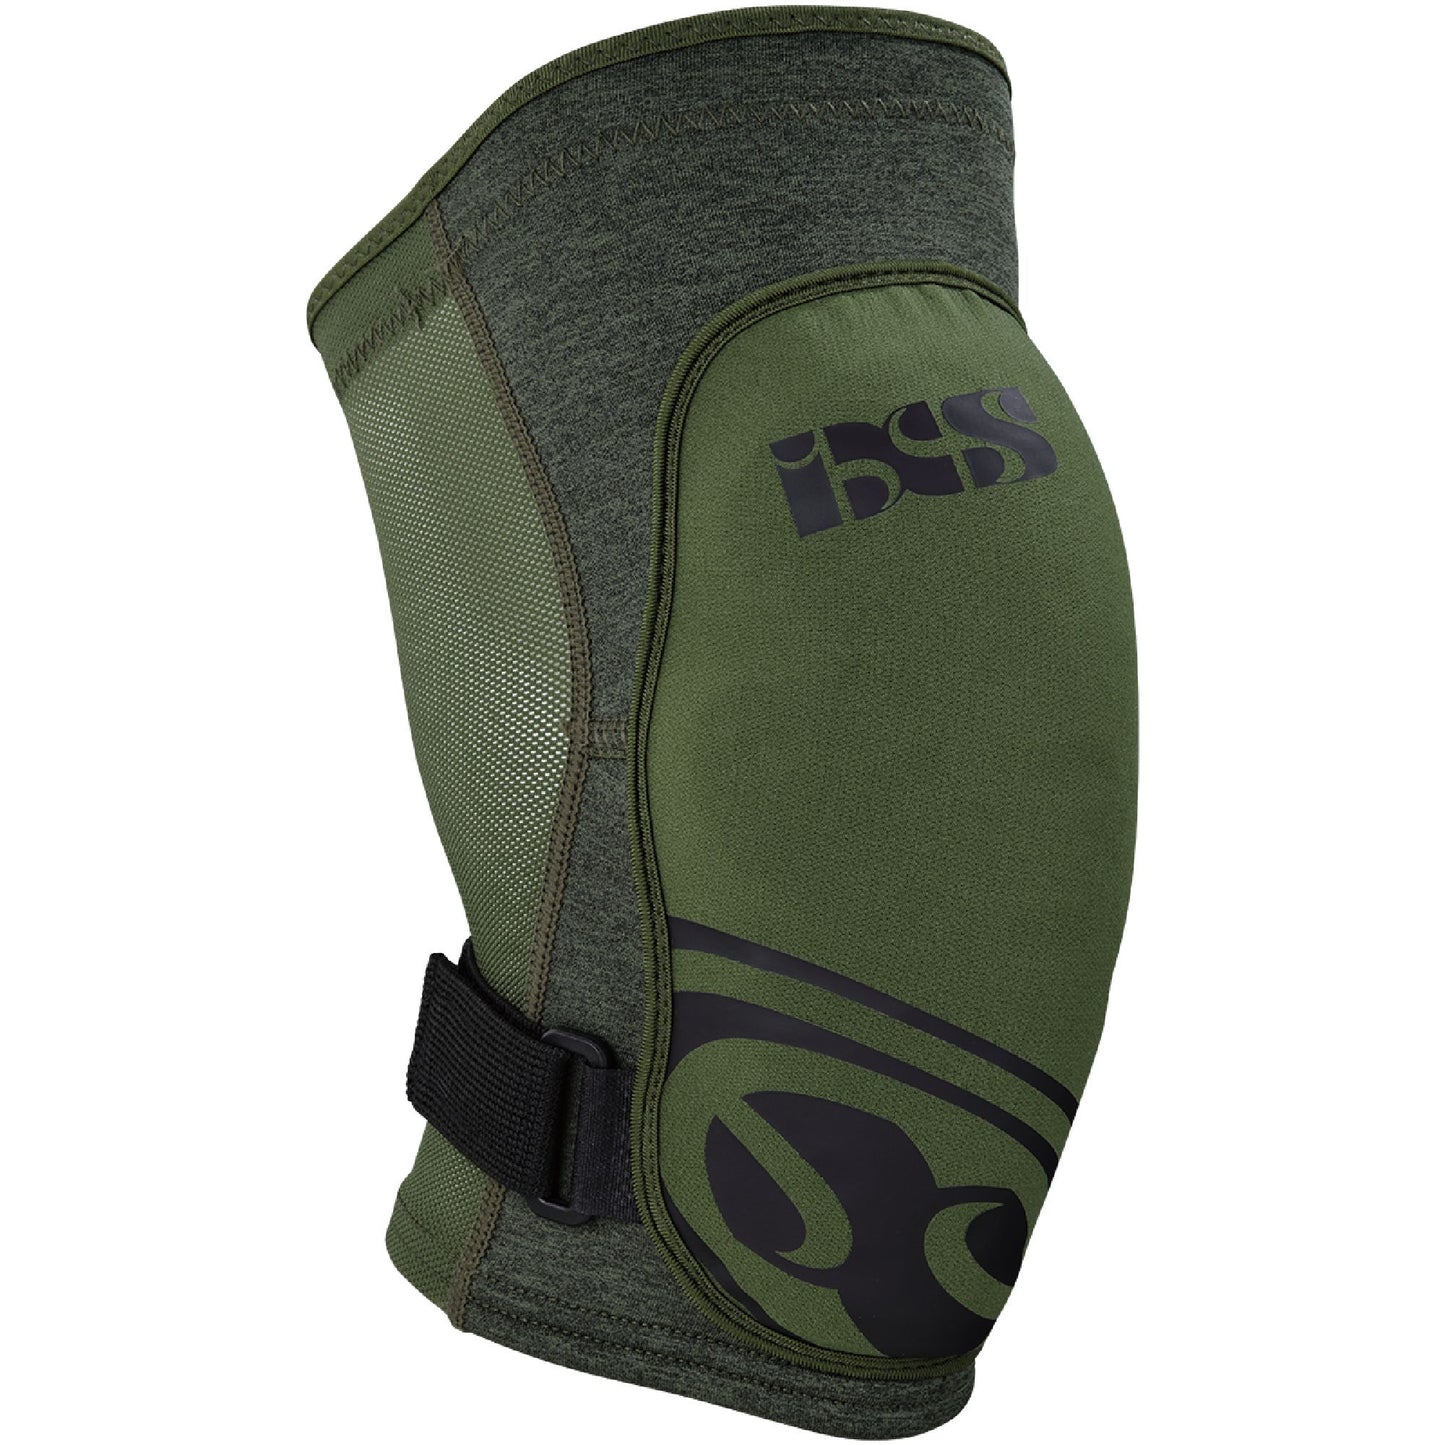 iXS Flow Evo+ Elbow Guards Olive Protective Gear